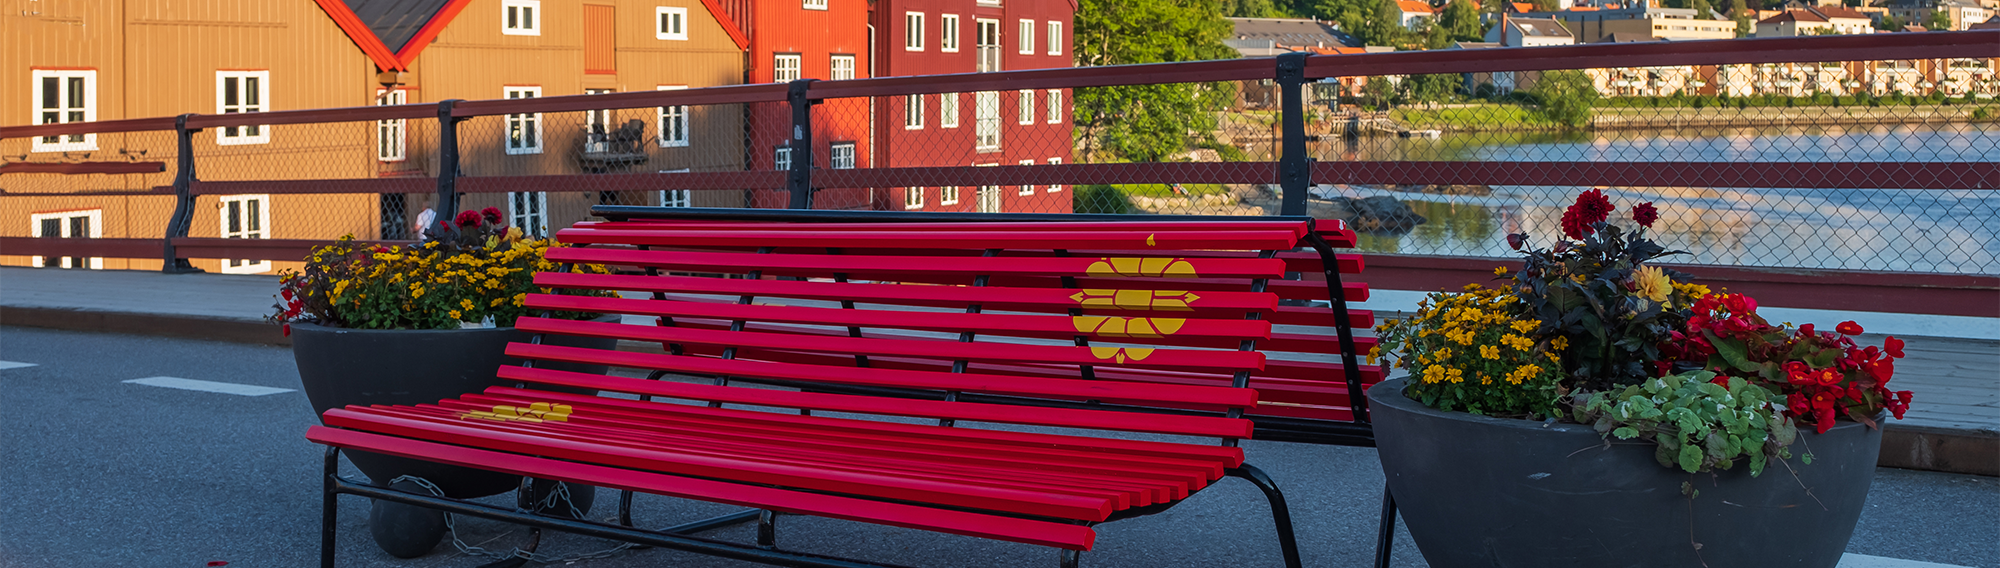 Red bench on a bridge with flowers. Colourful wharf houses along the river in the background.